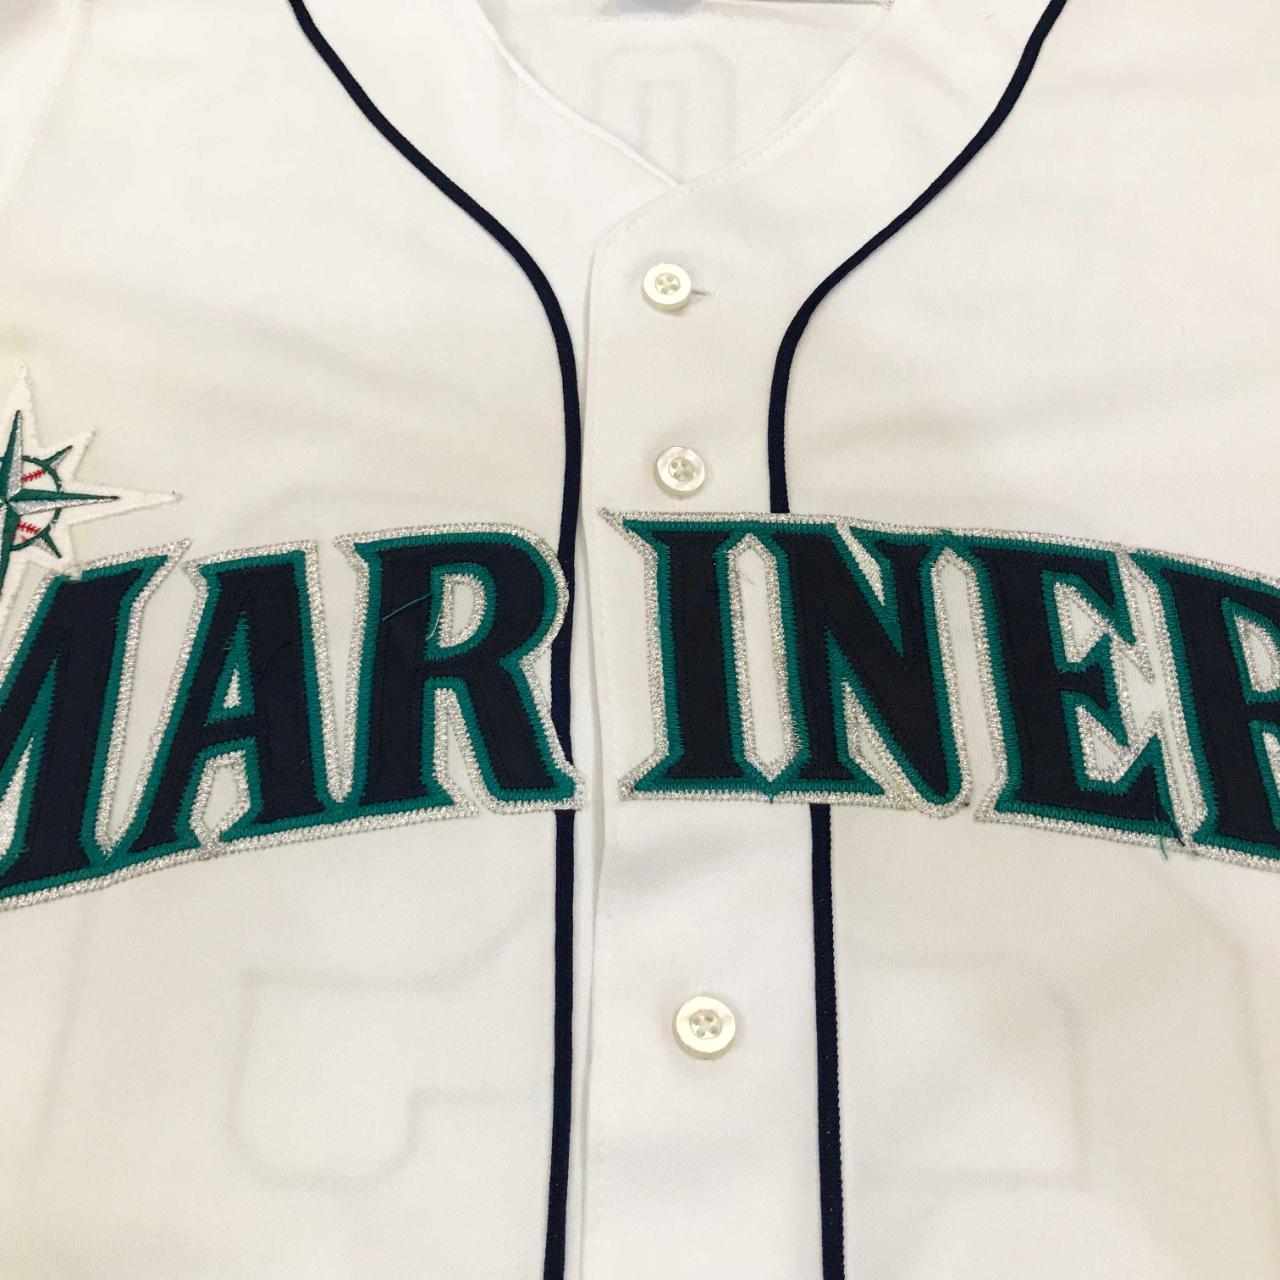 Seattle Mariners official licensed MLB jersey made - Depop